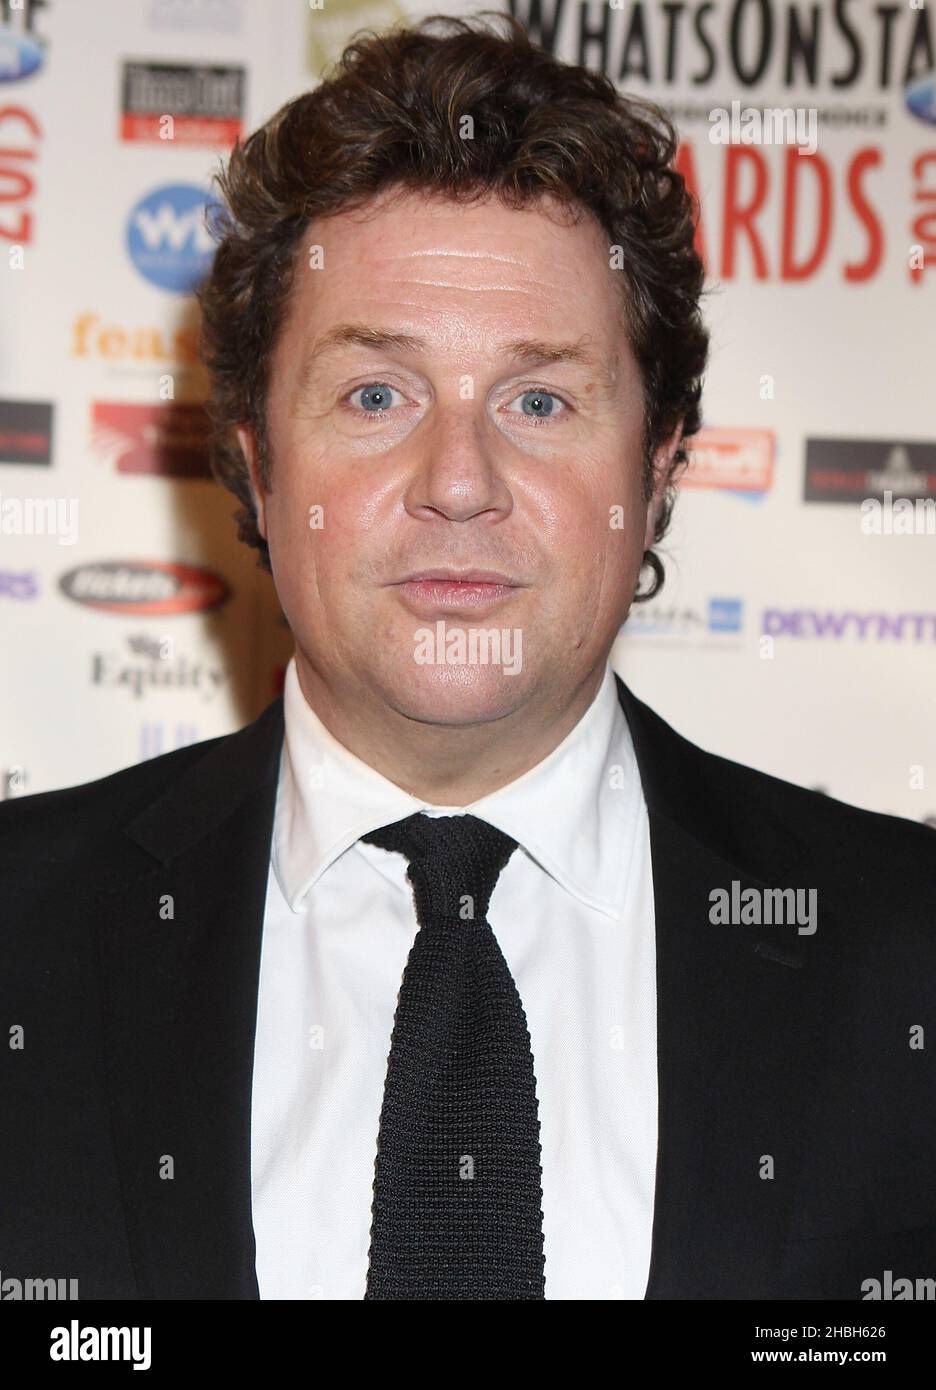 Michael Ball is Best Actor in a Musical at the Whatsonstage Awards at the Palace Theatre in London. Stock Photo